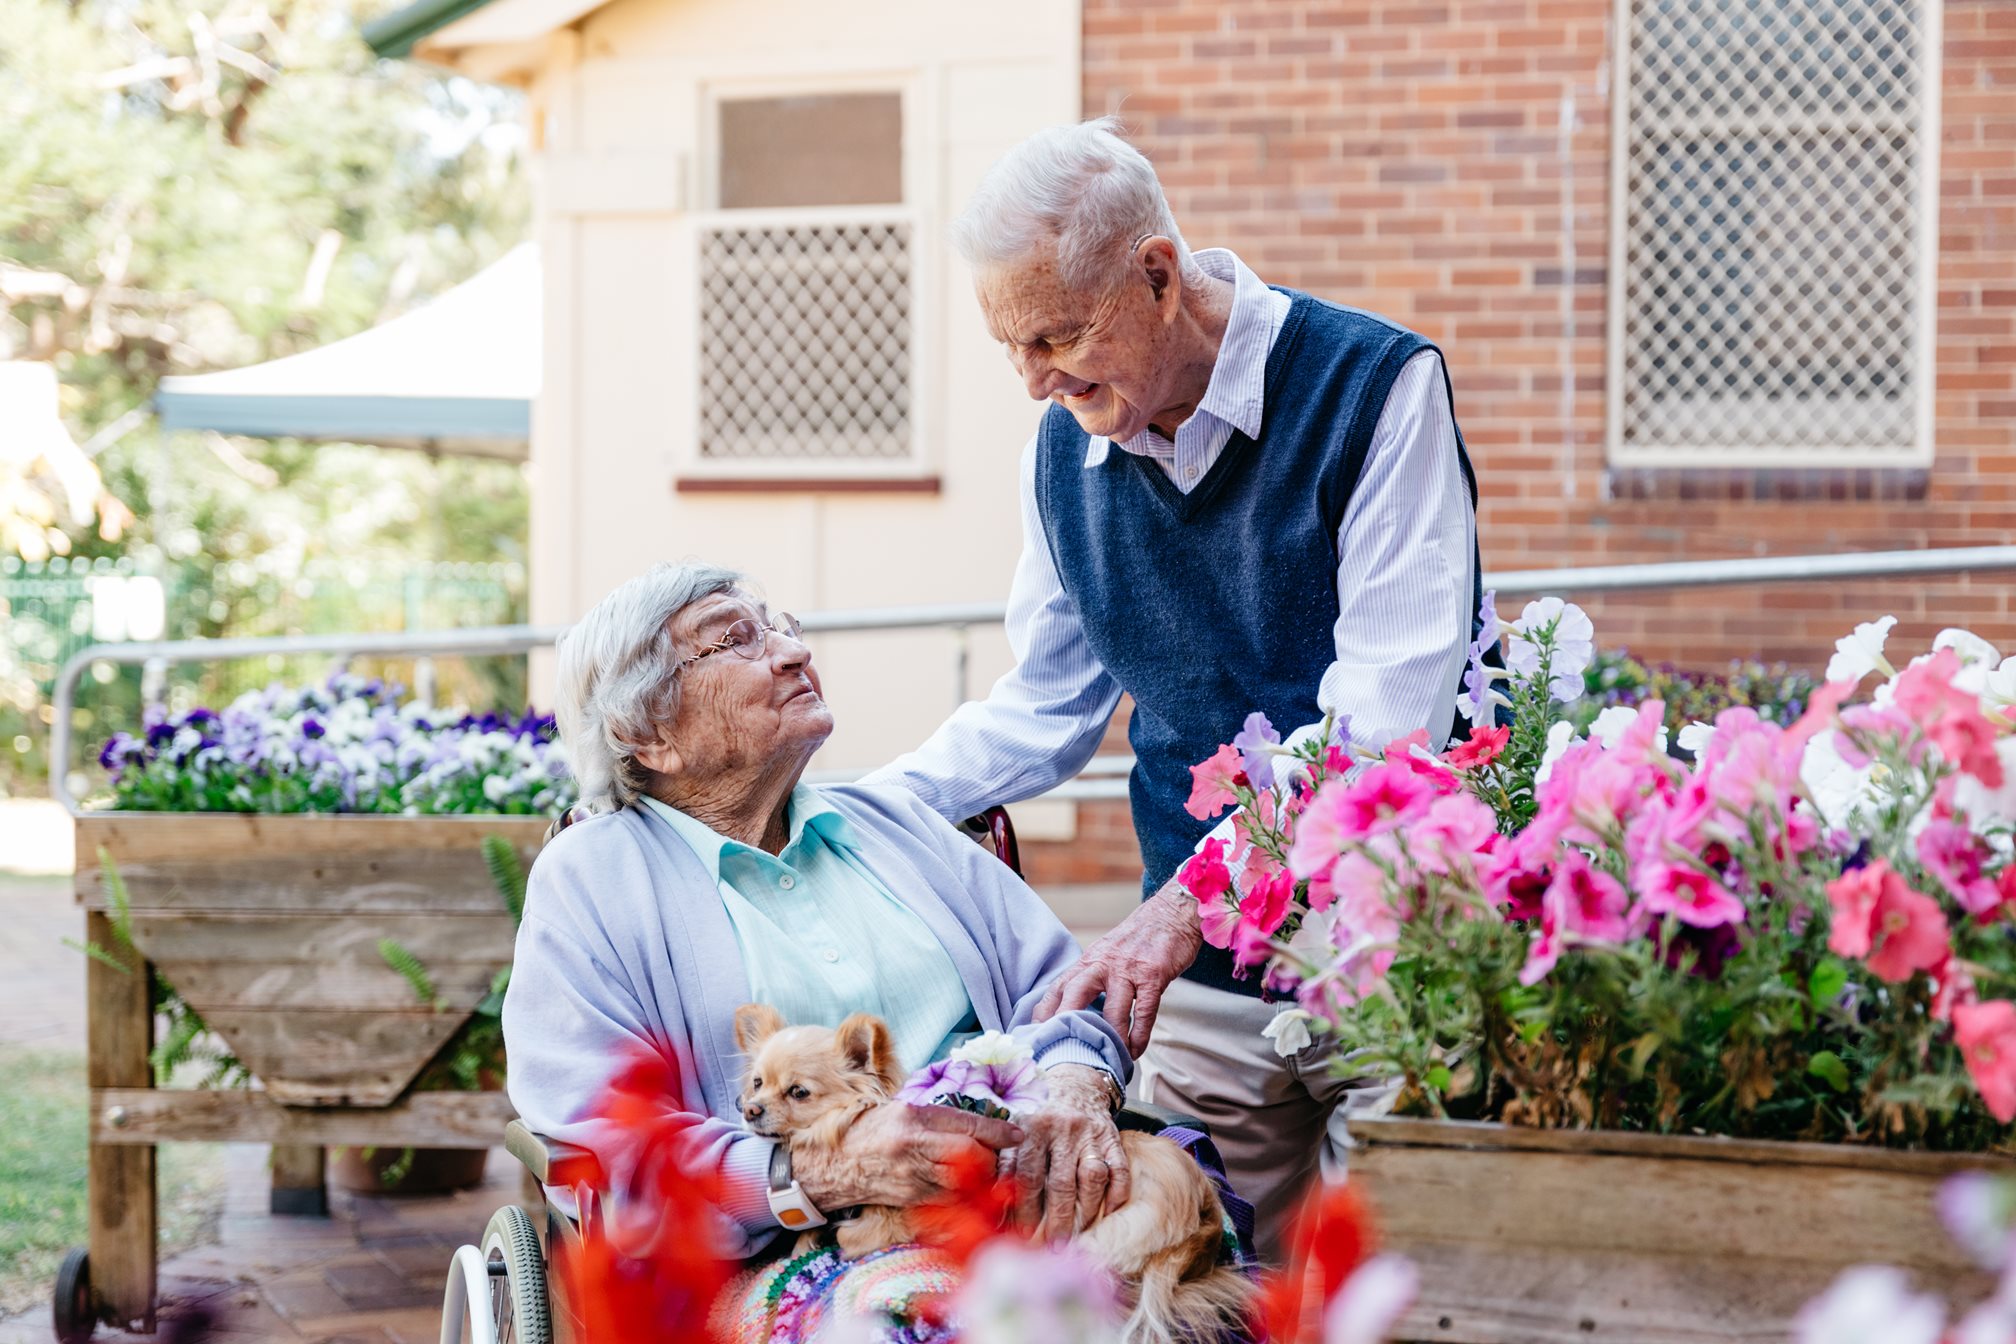 How to talk about aged care with your family